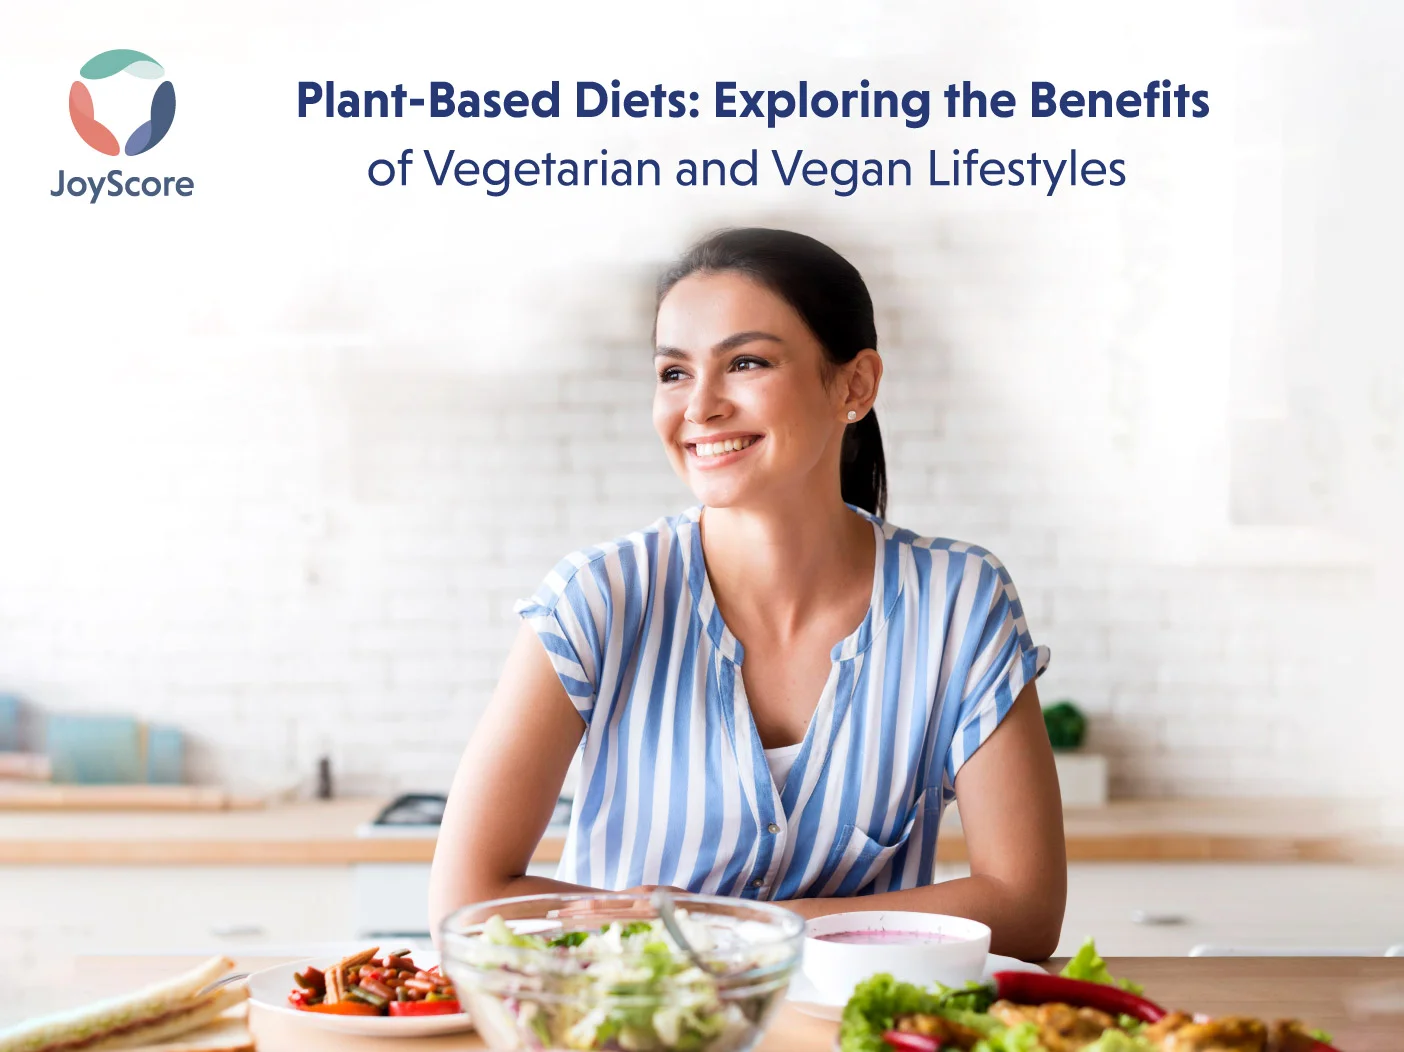 Plant-Based Diets: Exploring The Benefits Of Vegetarian And Vegan Lifestyles